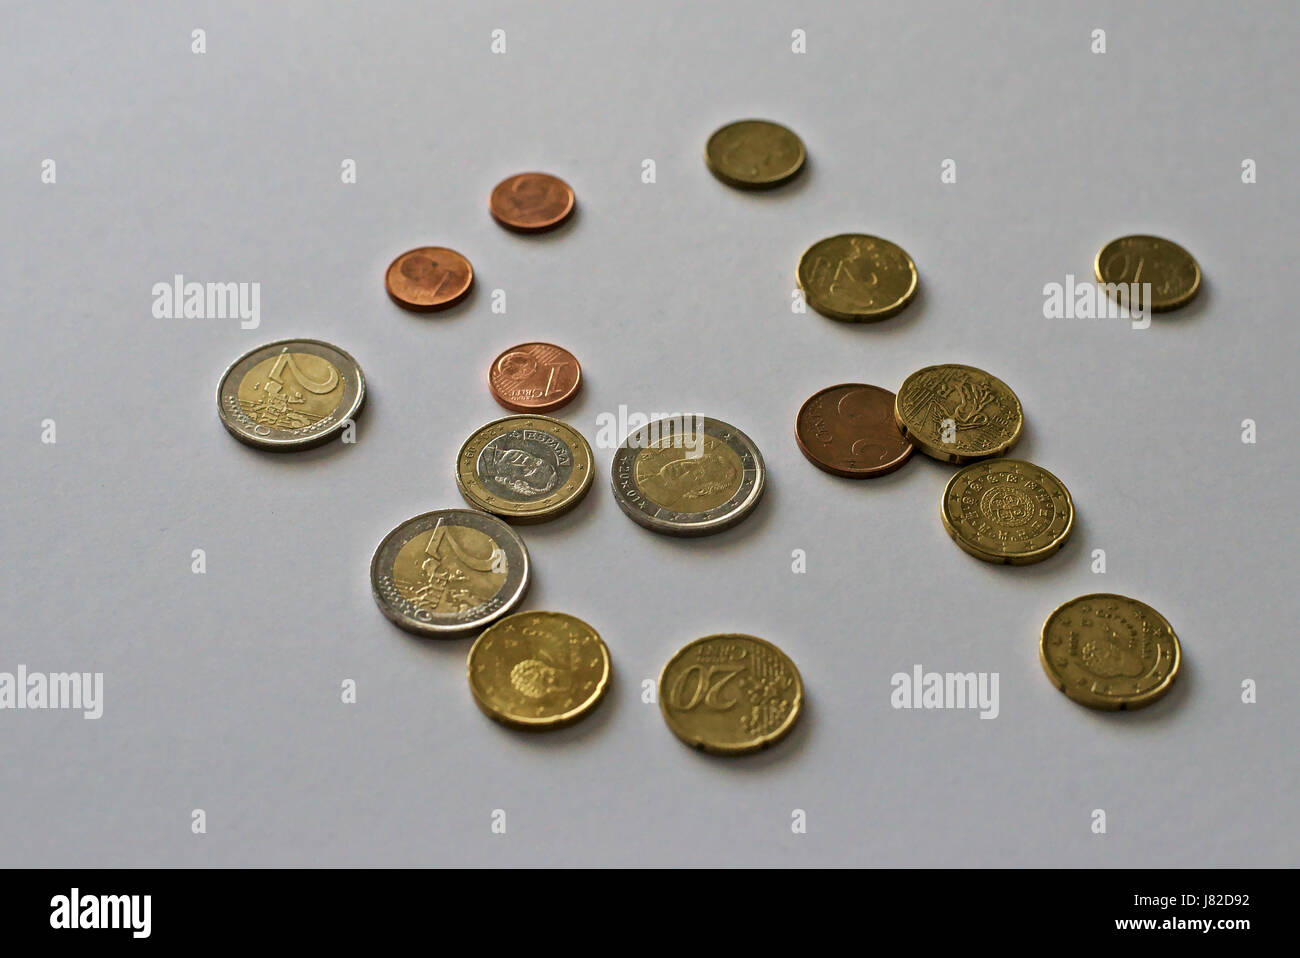 Unsorted coins, euros in particular, with white background Stock Photo